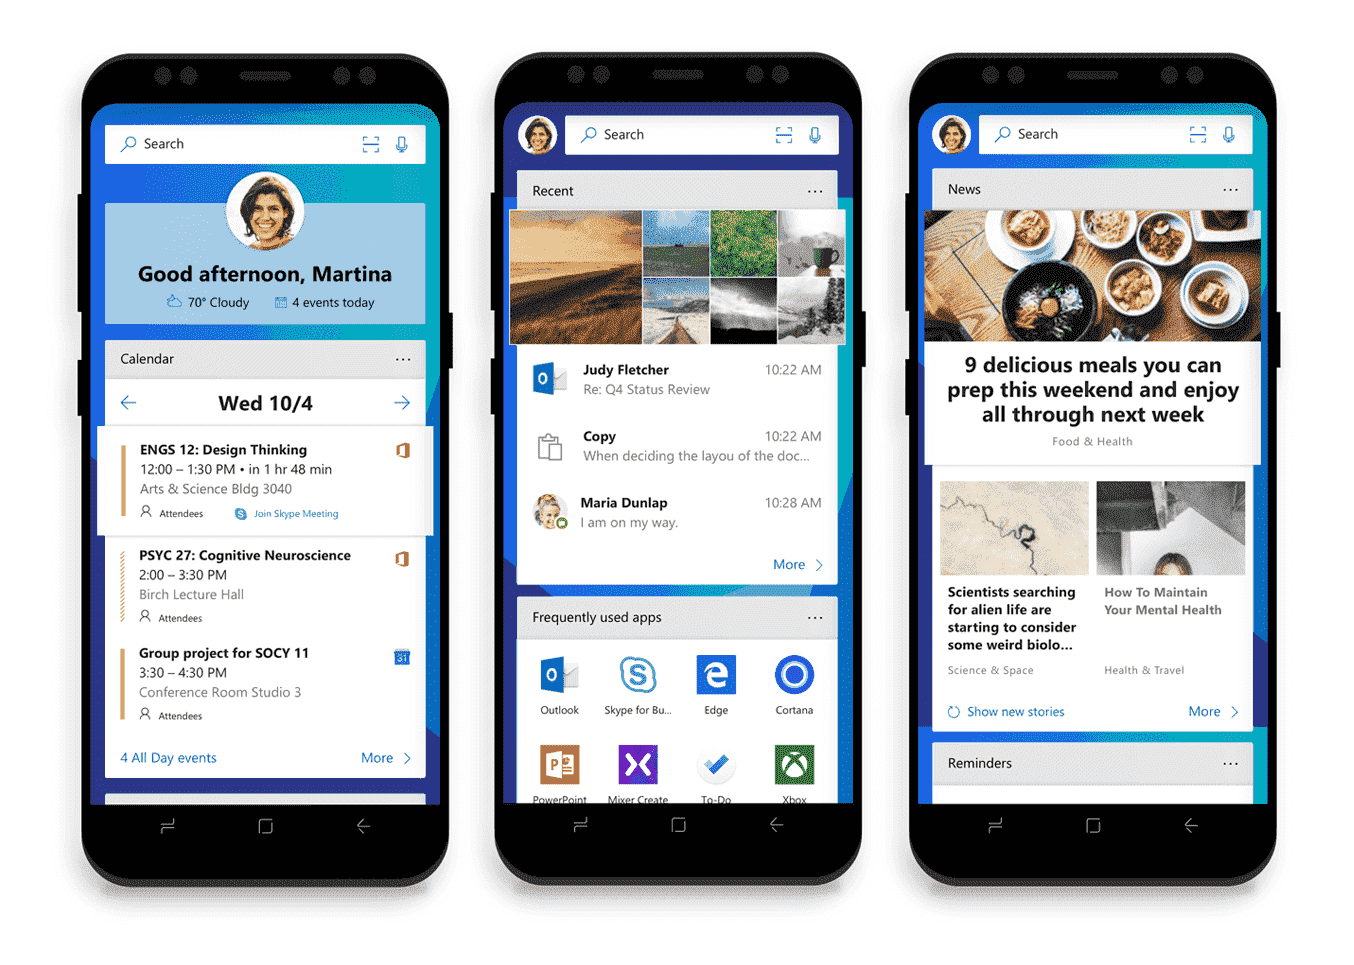 Microsoft Edge Beta for iOS receives new features for iPad users 8268874d2e645d4bb0948d74441562cd.png